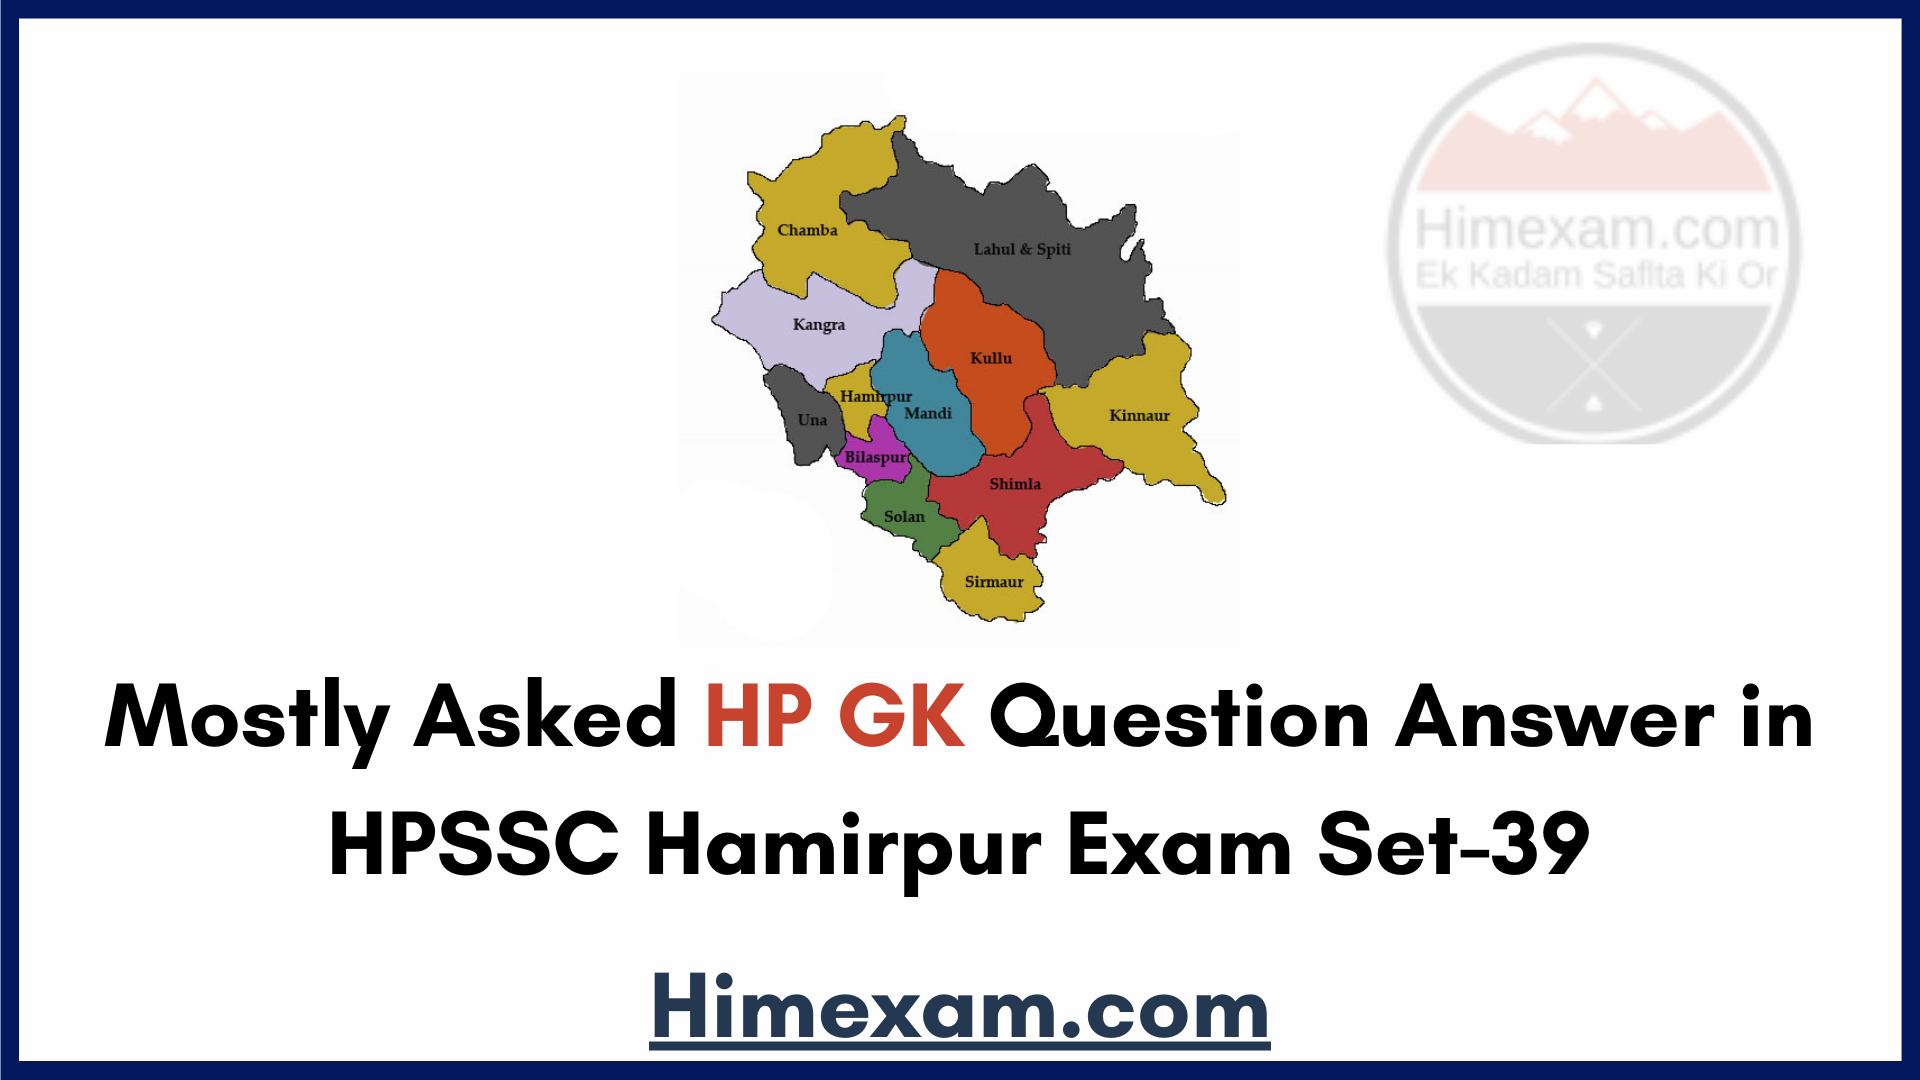 Mostly Asked HP GK Question Answer in HPSSC Hamirpur Exam Set-39